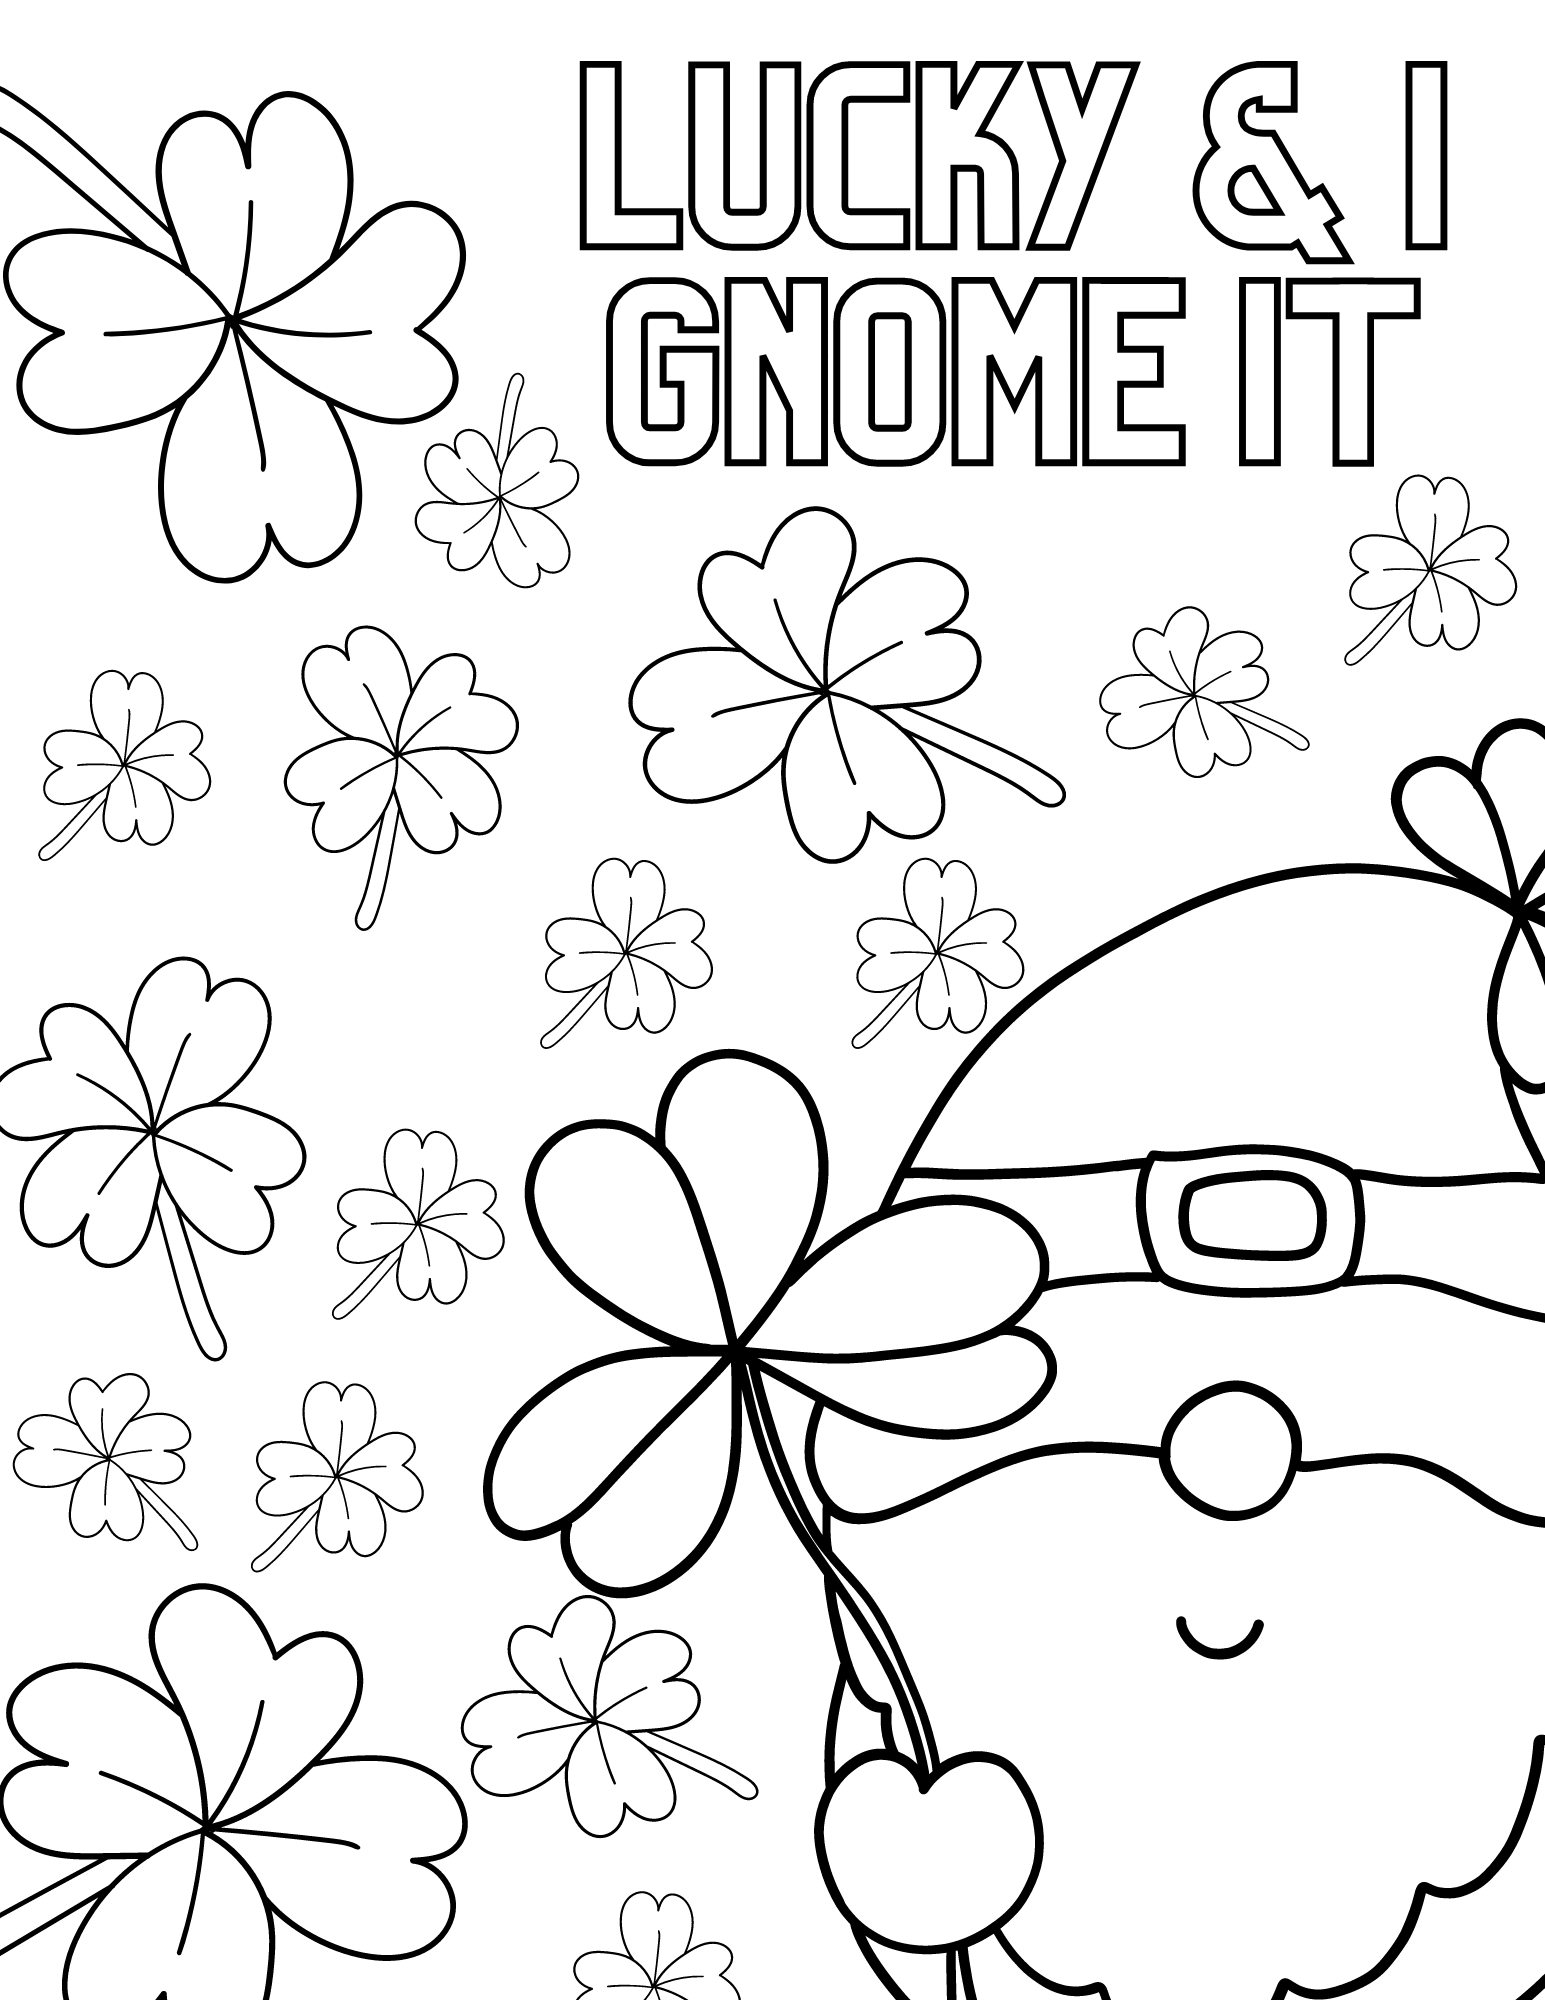 St patricks day gnomes coloring pages